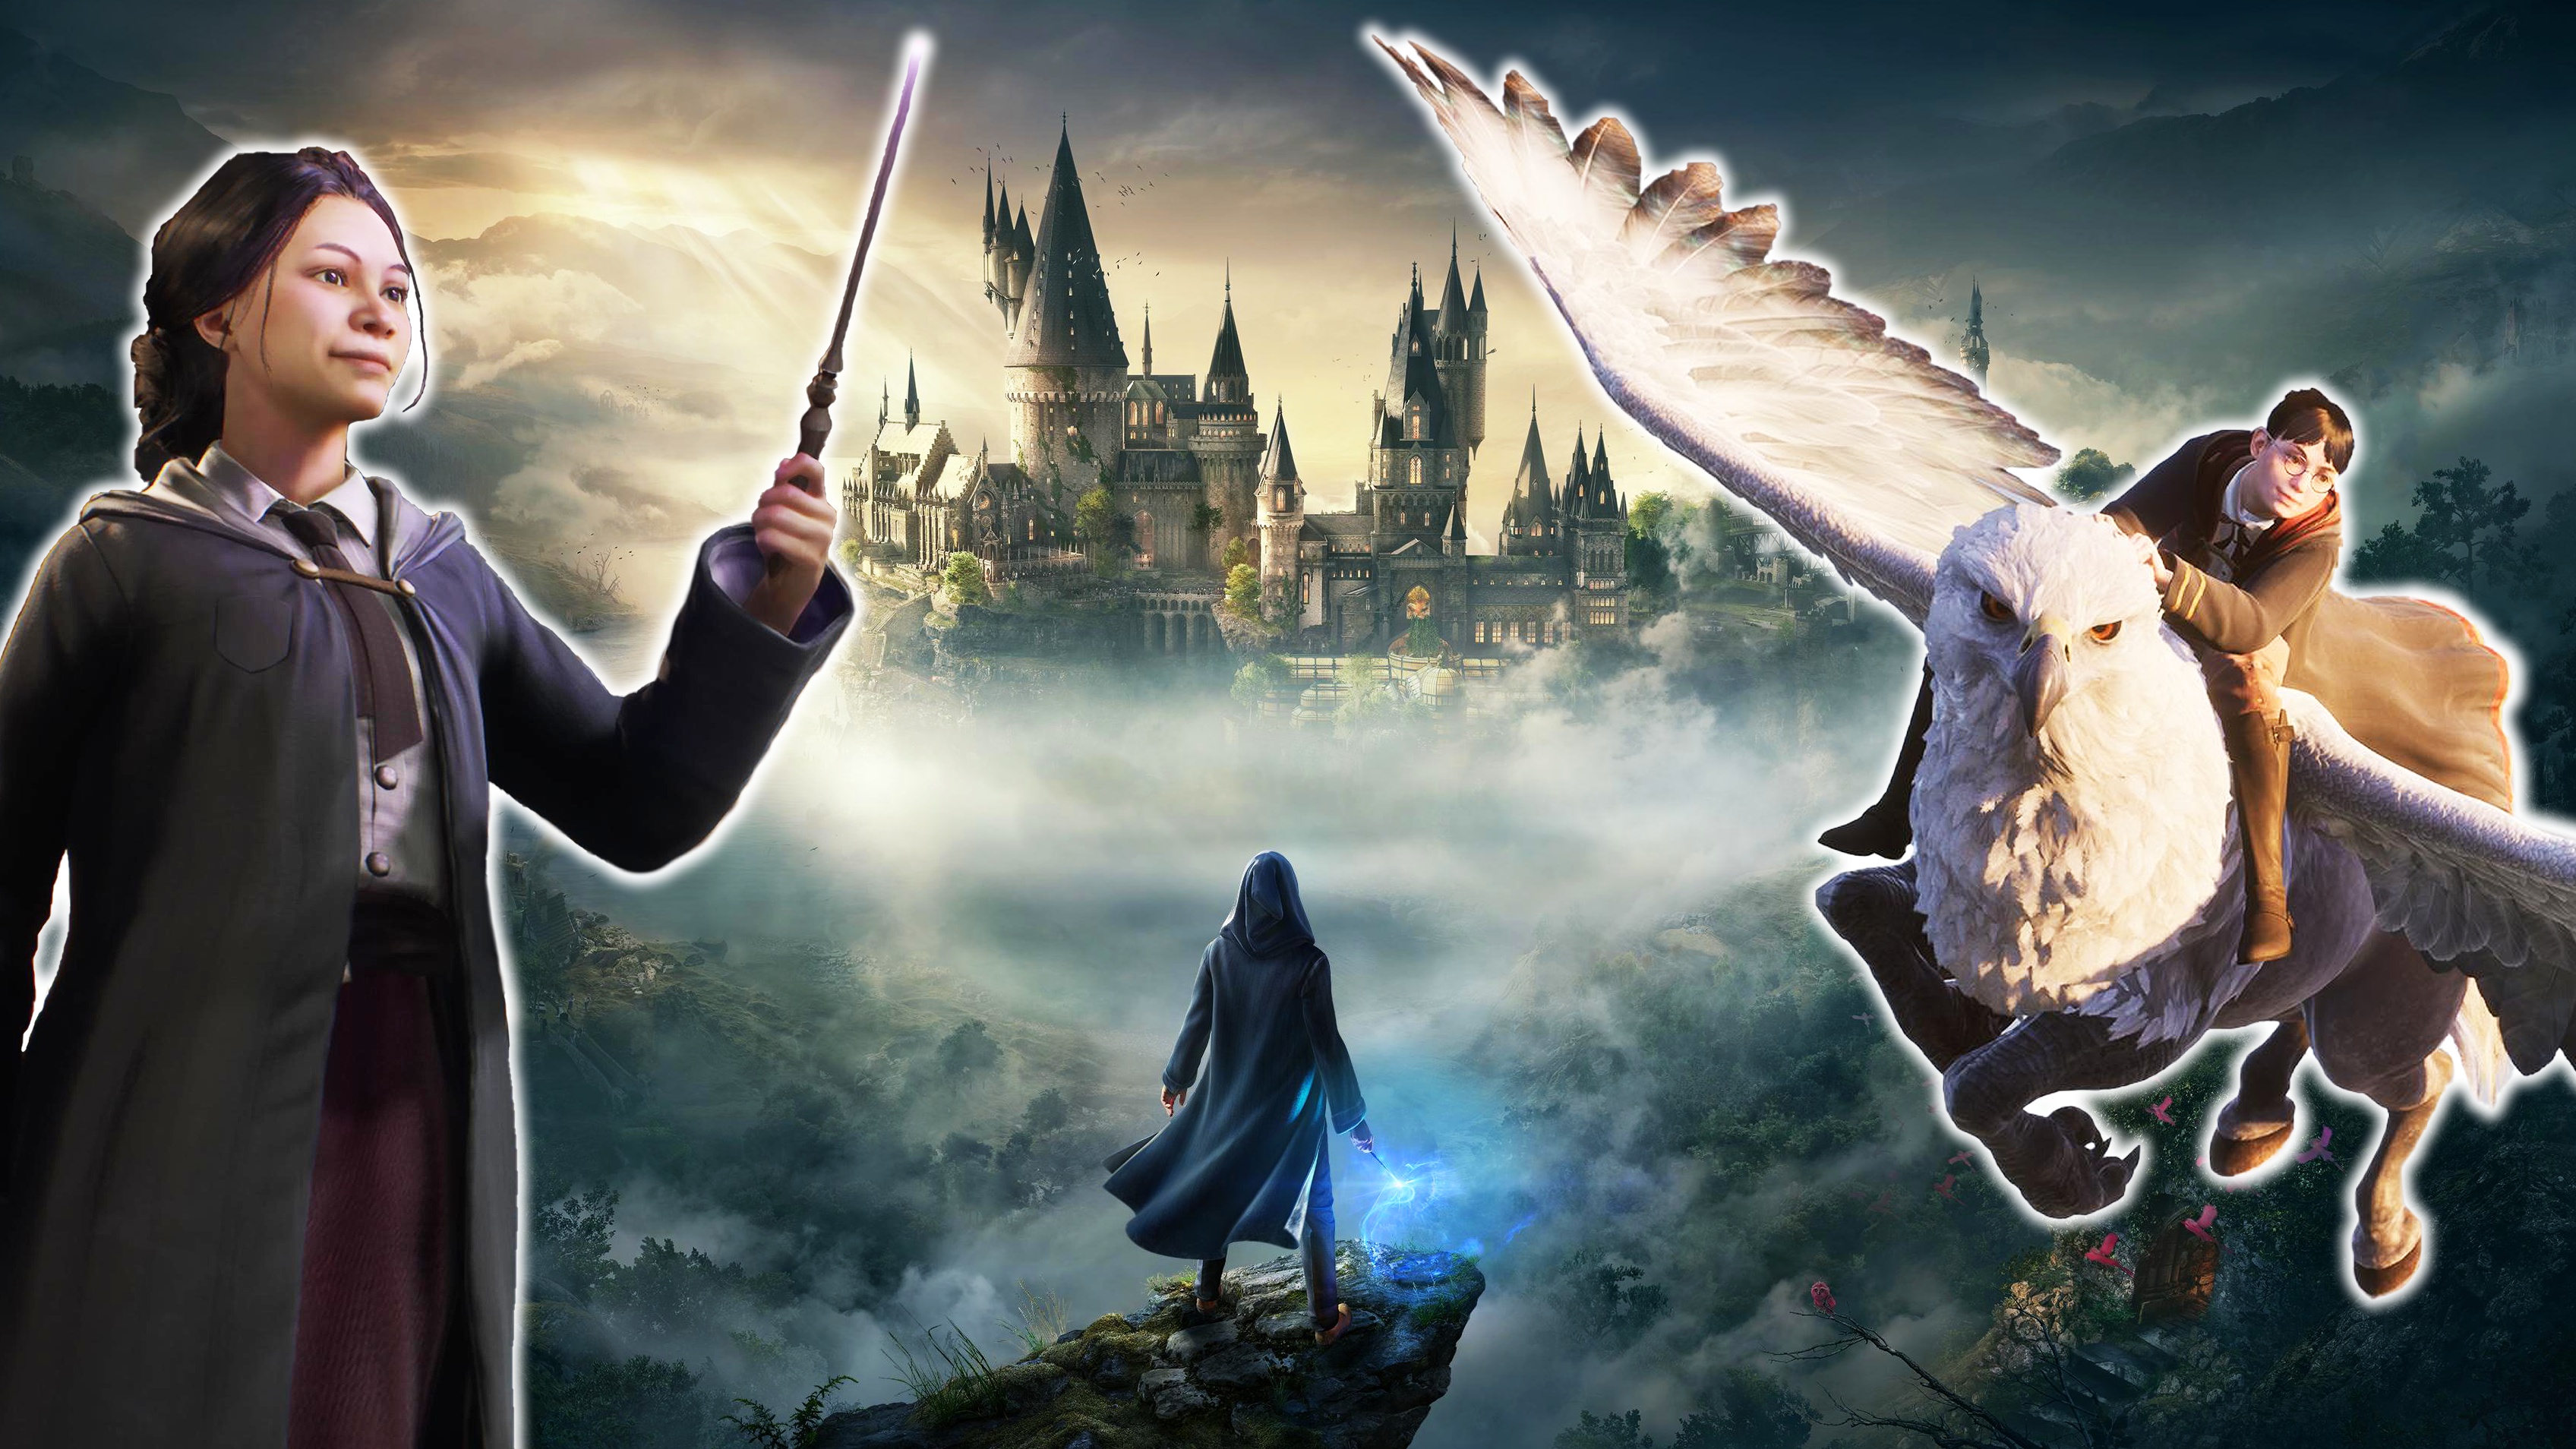 download hogwarts legacy switch release date